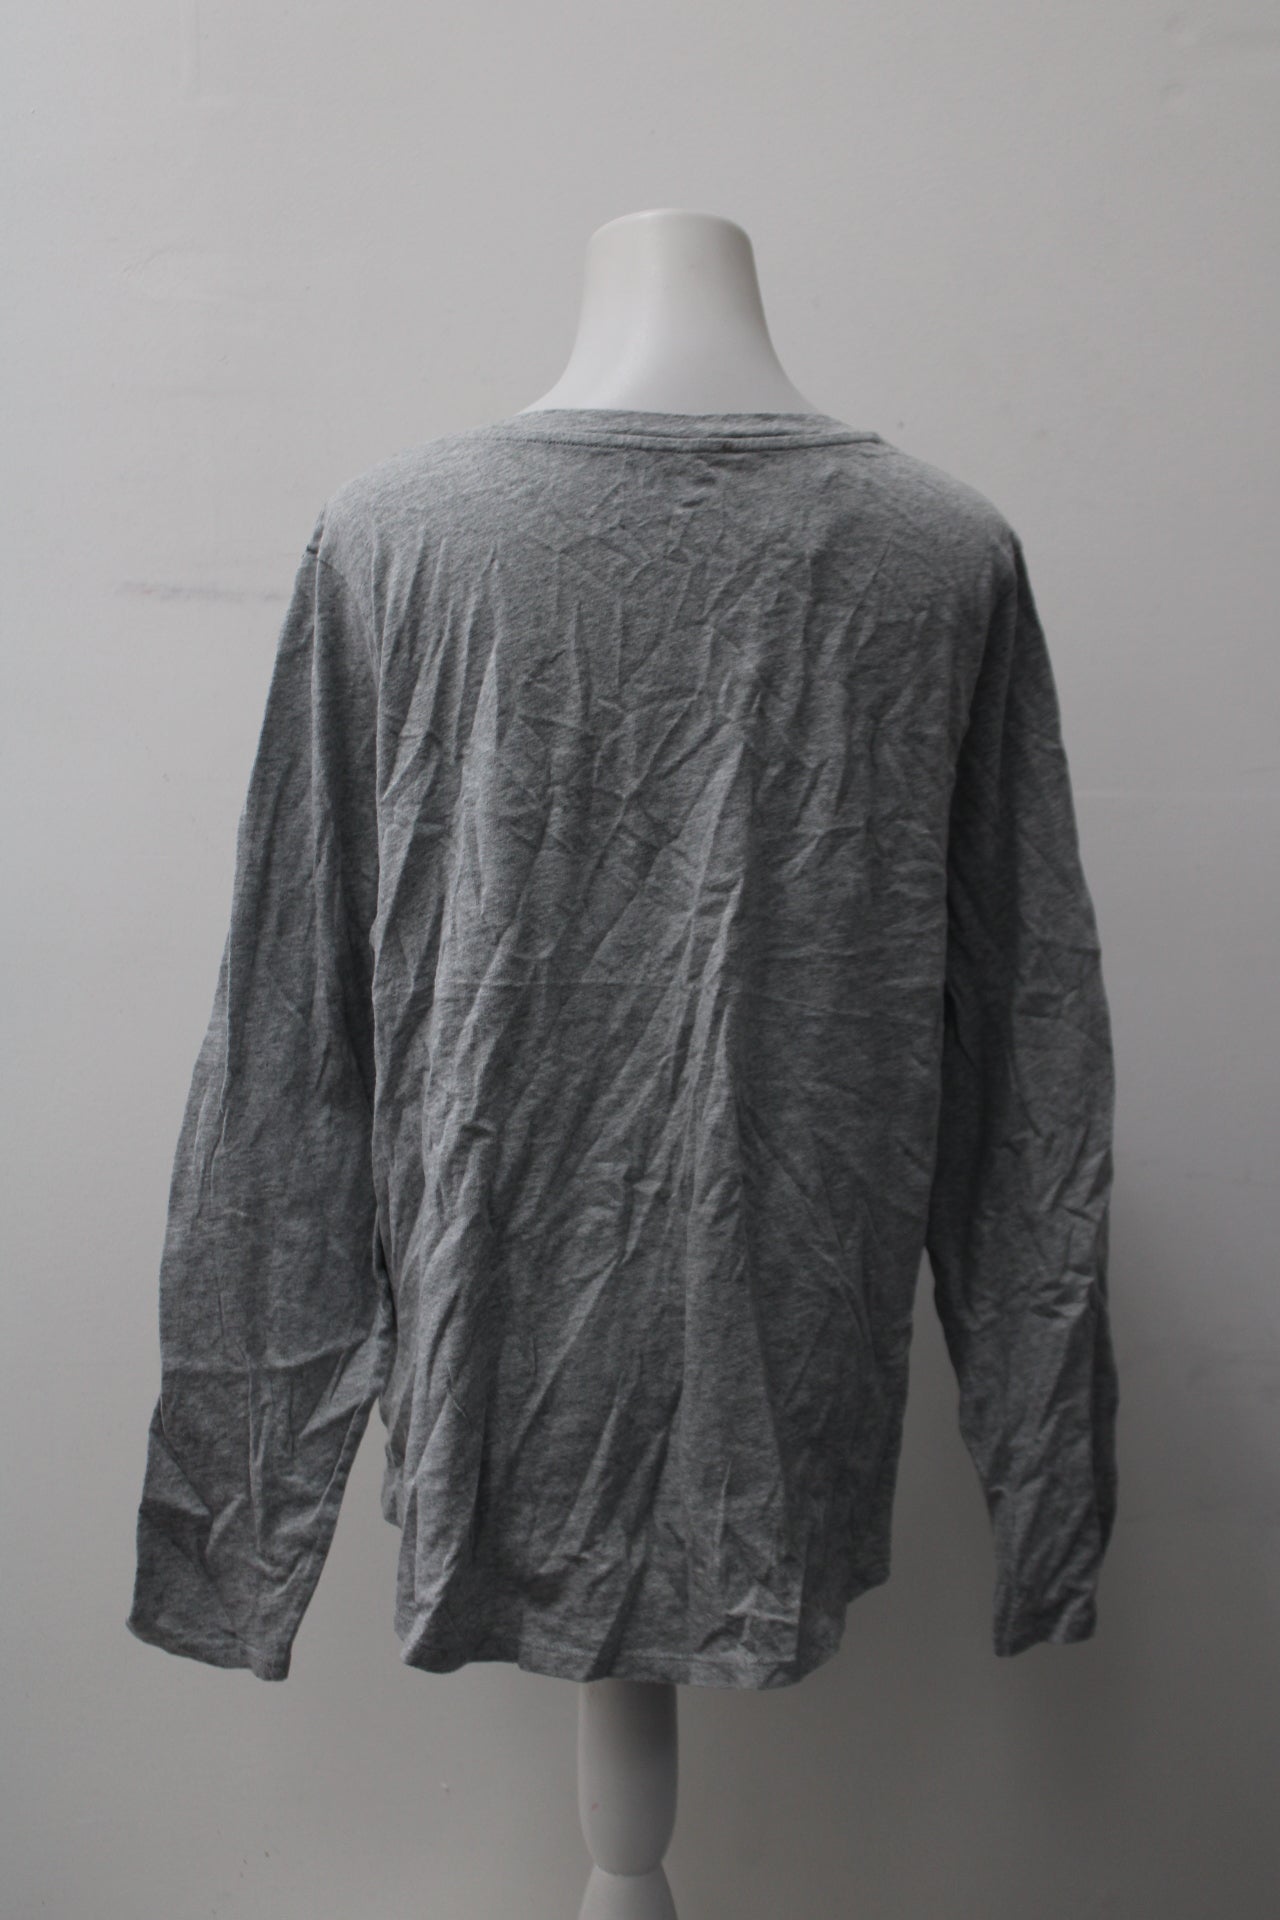 Old Navy Women's Top Gray XL Pre-Owned